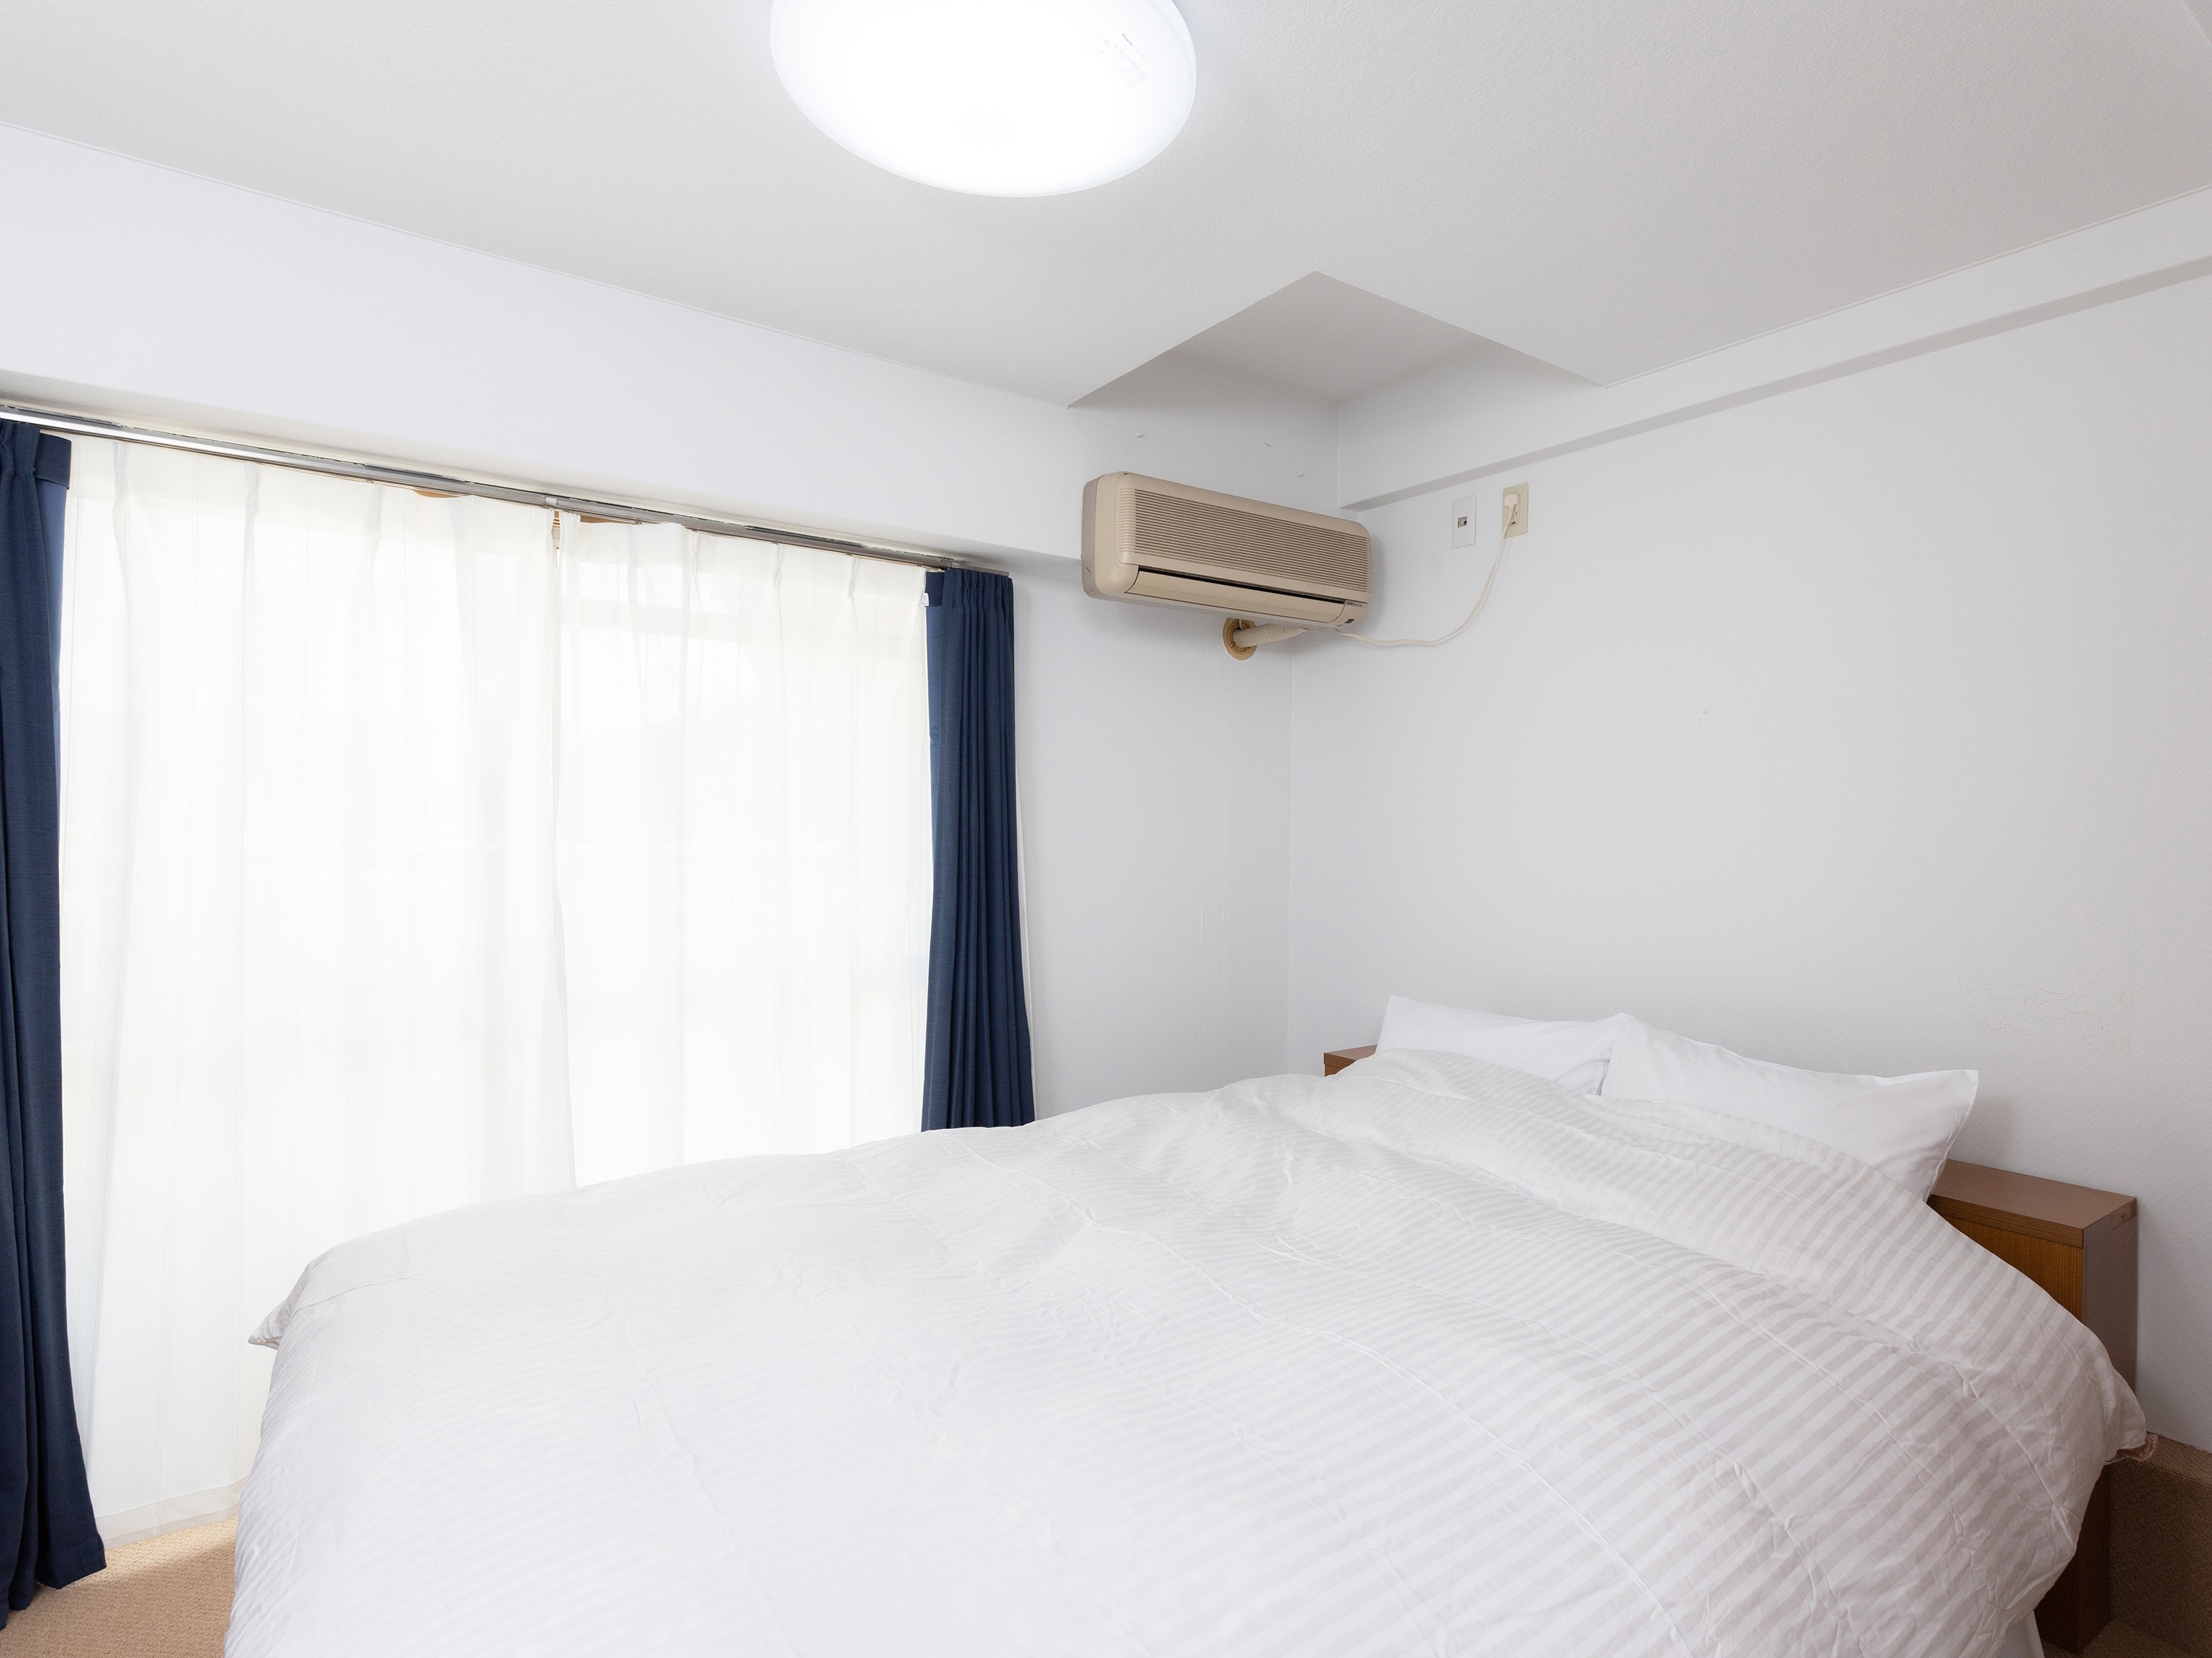 [Rooms] Double room / 19 sqm / 140 cm wide bed & times; 1 unit / Capacity 1-2 people / All rooms are non-smoking